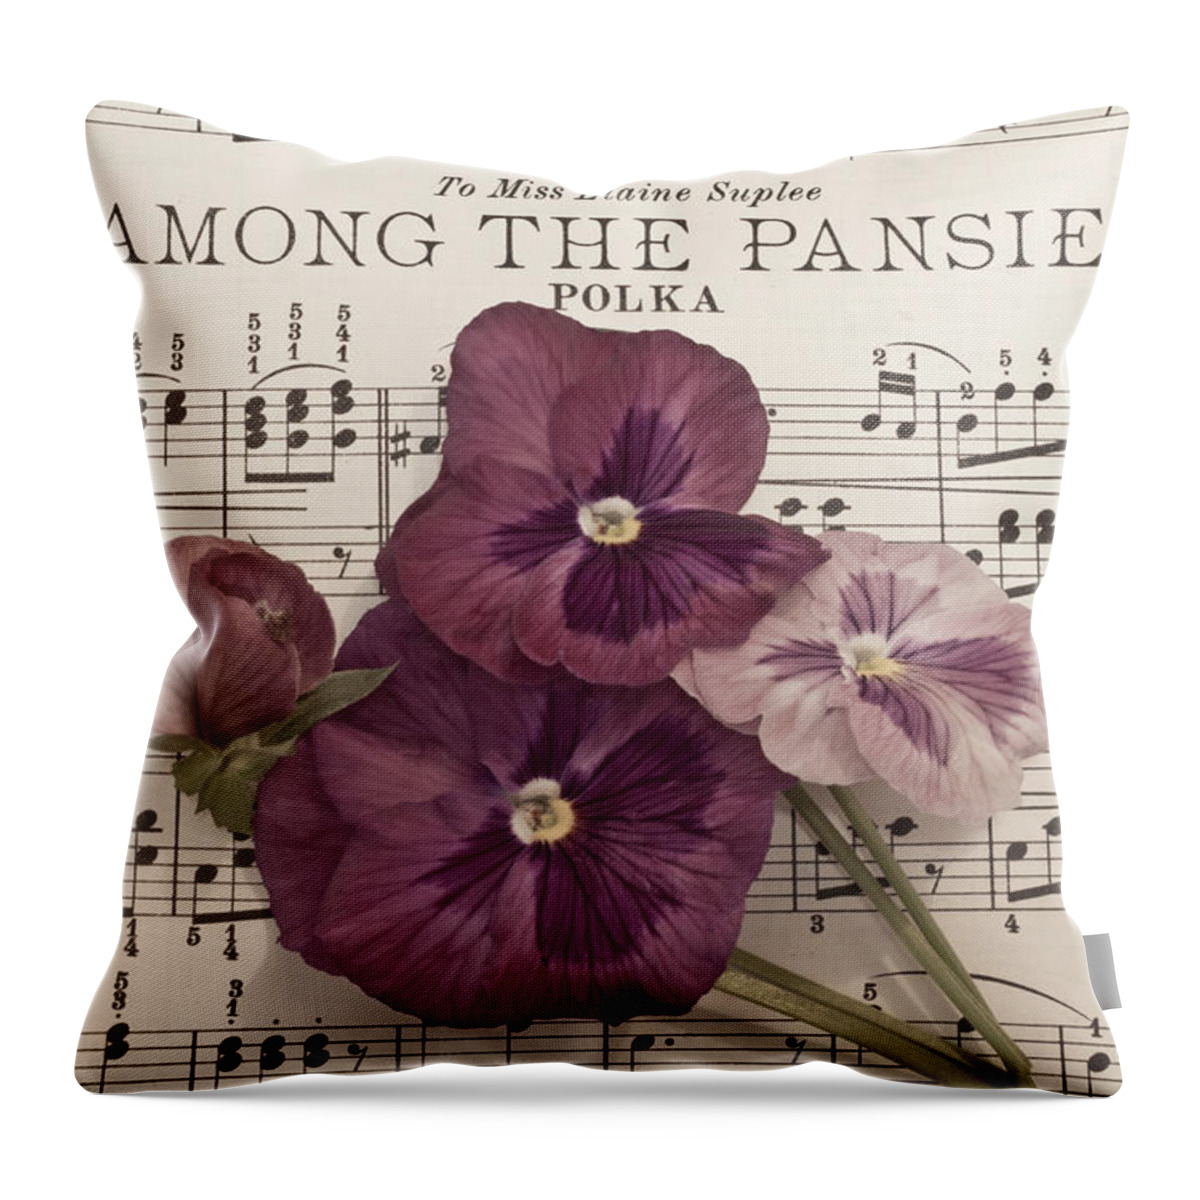 Pansy Throw Pillow featuring the photograph Among The Pansies by Sandra Foster